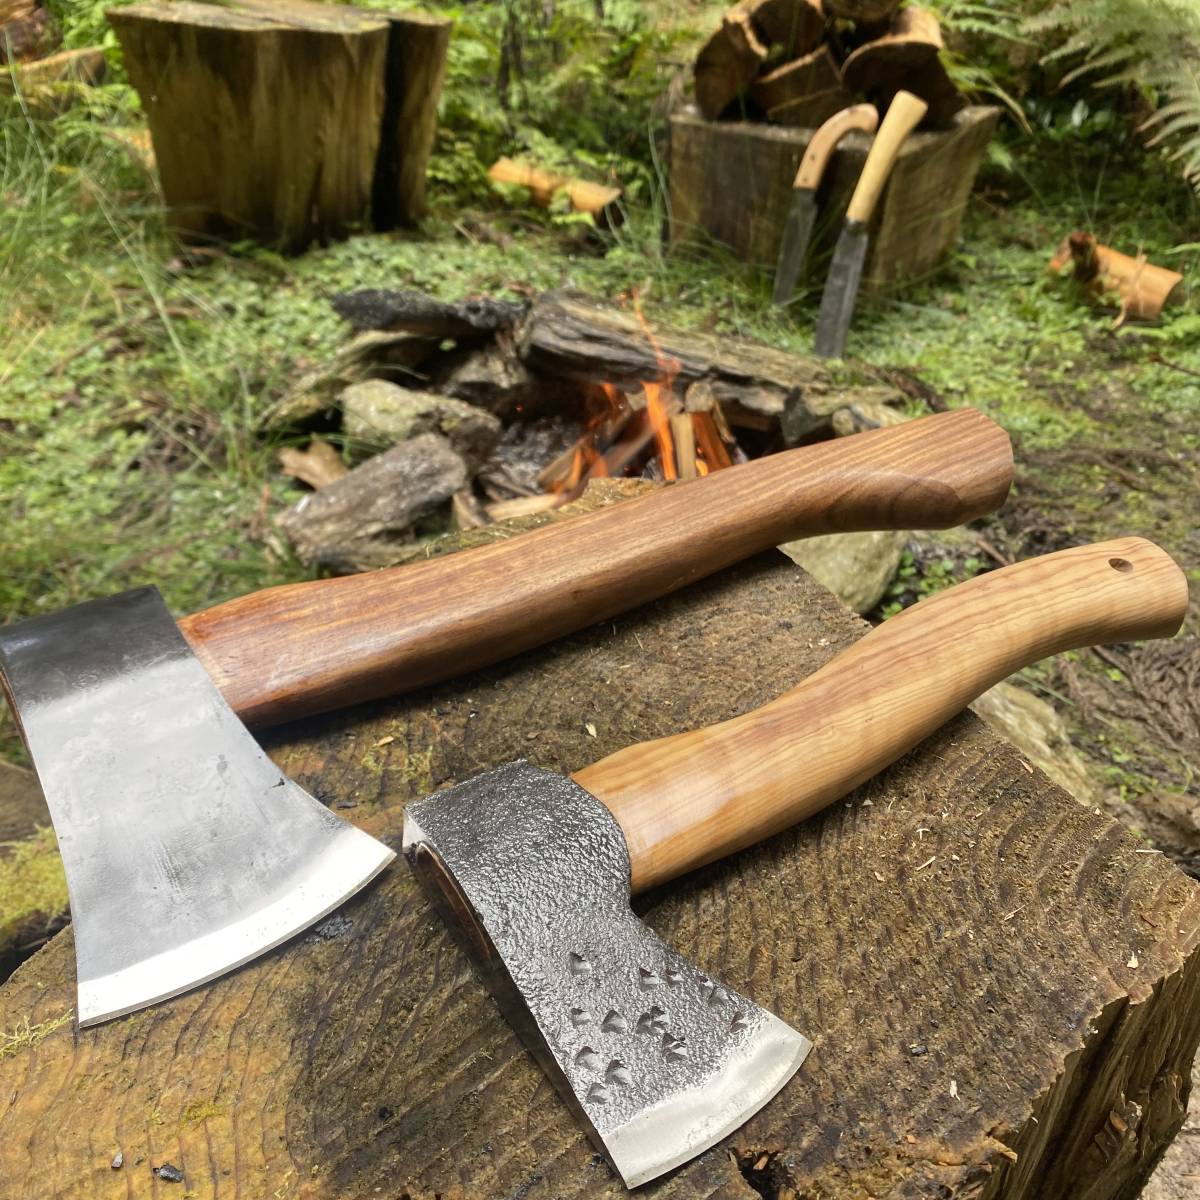  original axe / is Chet Hatchet/ leather sheath / leather cover / rose wood RoseWood/ outdoor / camp / firewood tenth /. industry /. tree /../..